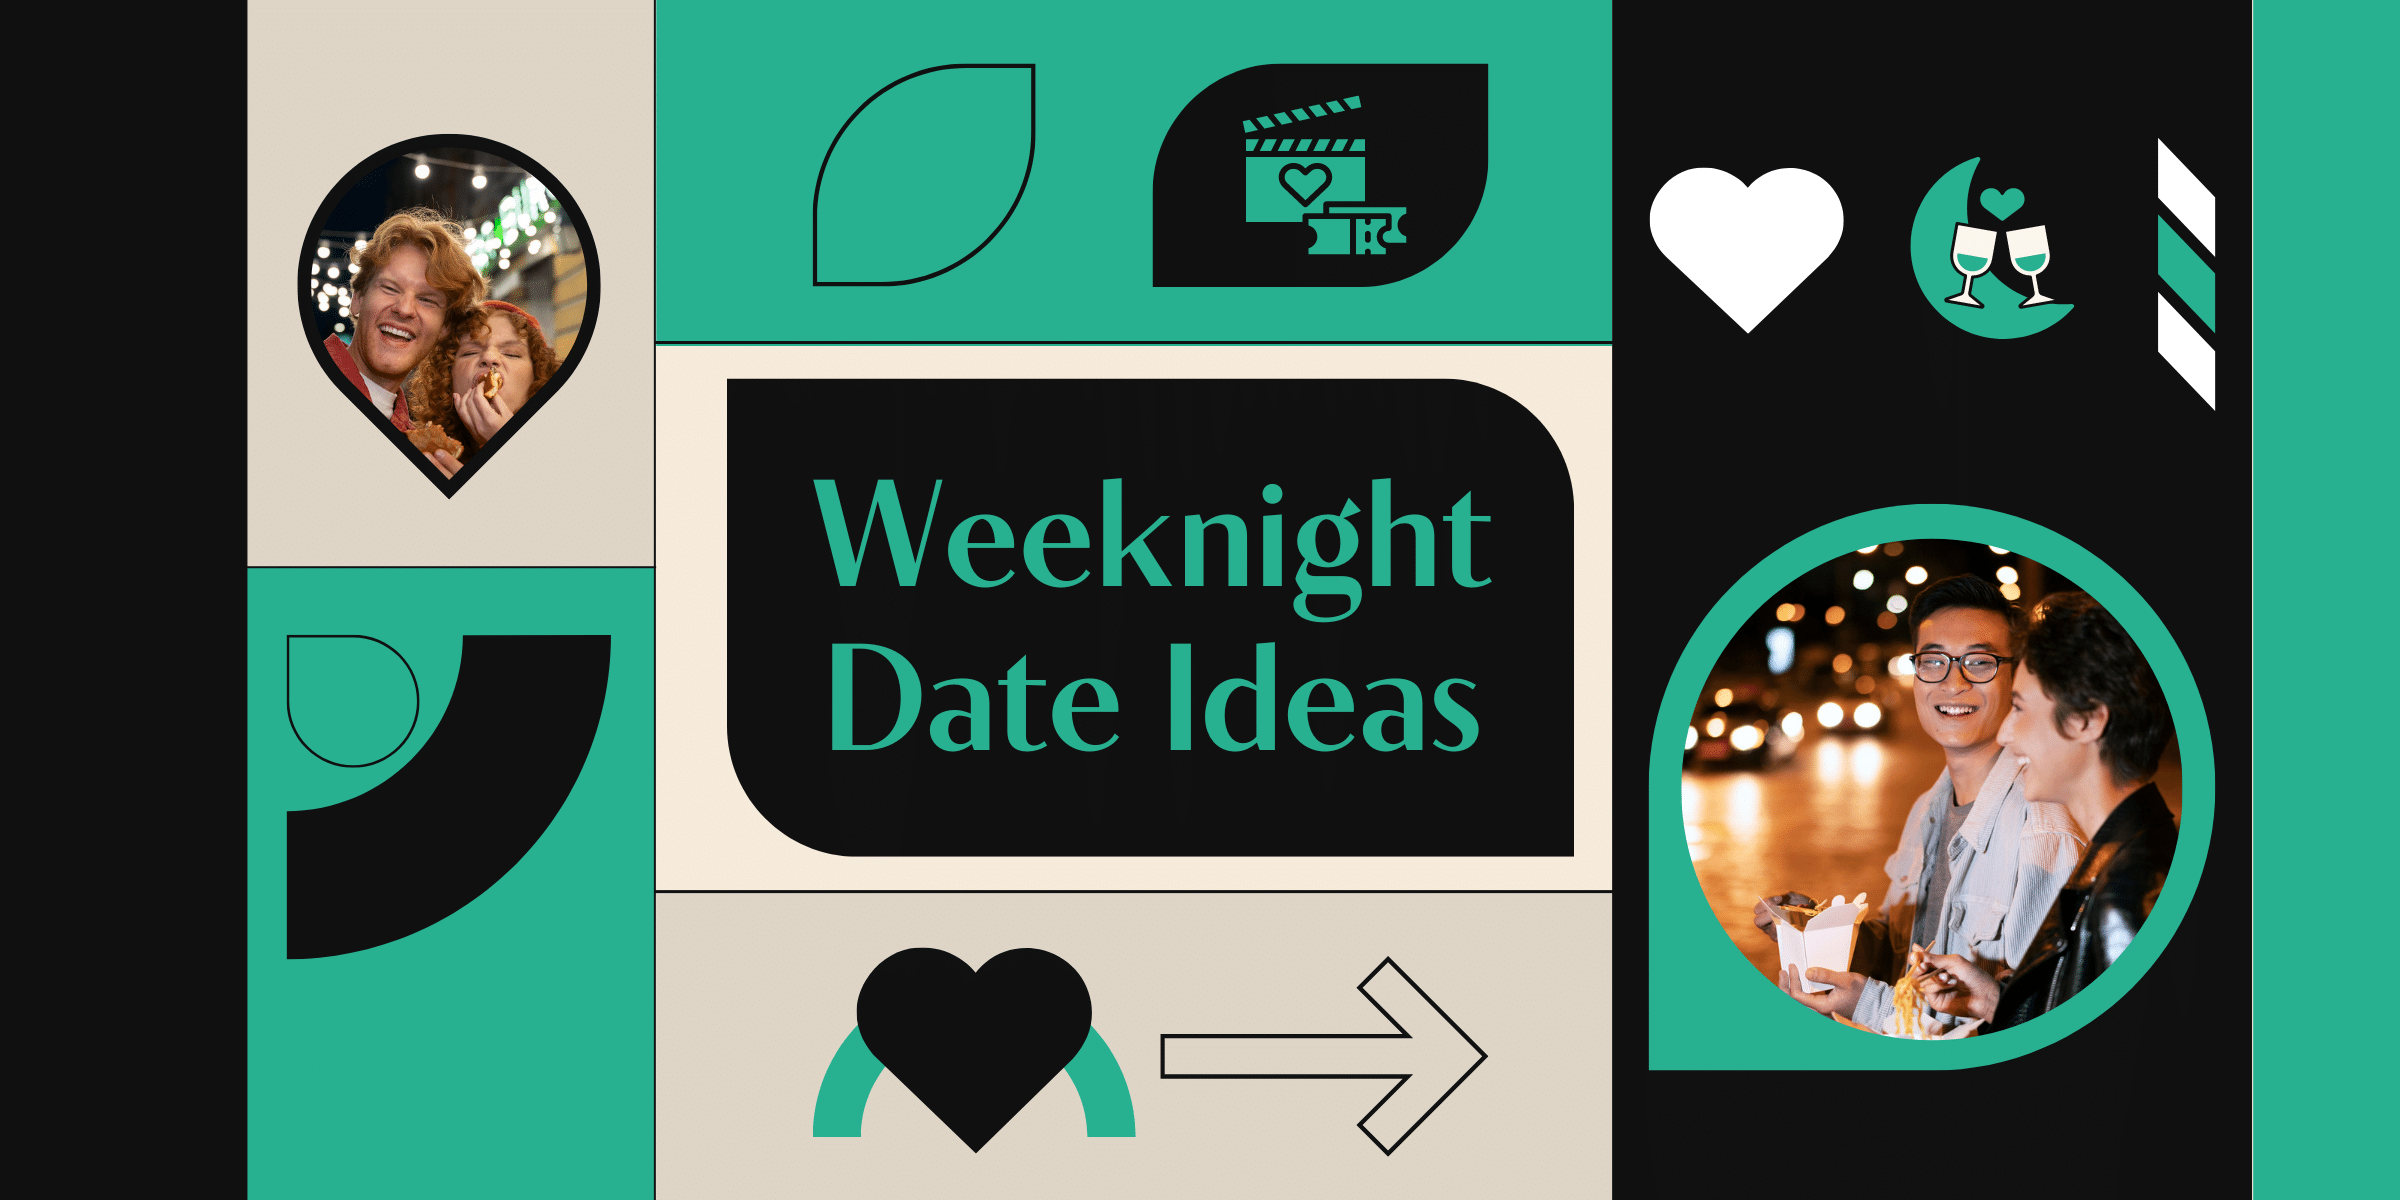 Feeling stumped when it comes to weeknight date ideas? We have you covered! Take a look at our list of simple date ideas you can enjoy any weeknight.